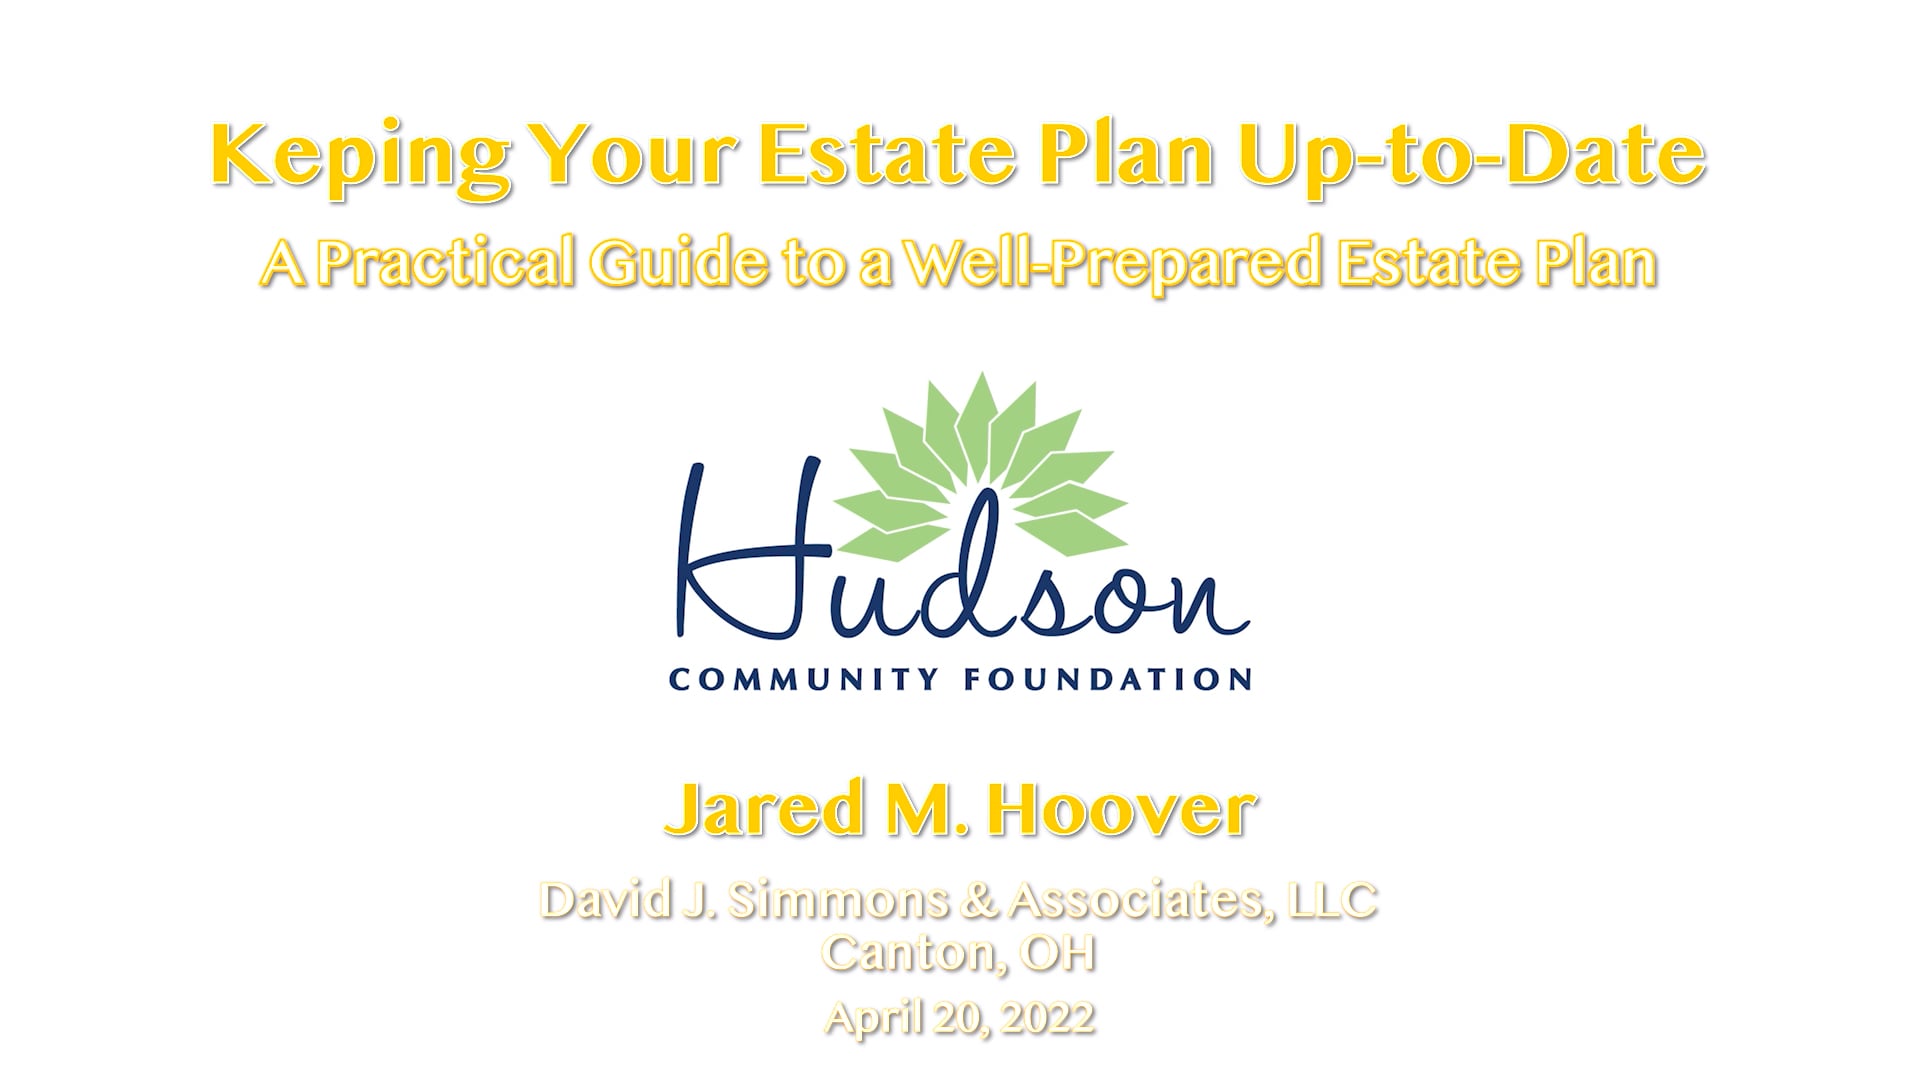 Hudson Community Foundation - Keep Your Estate Plan Up-to-Date